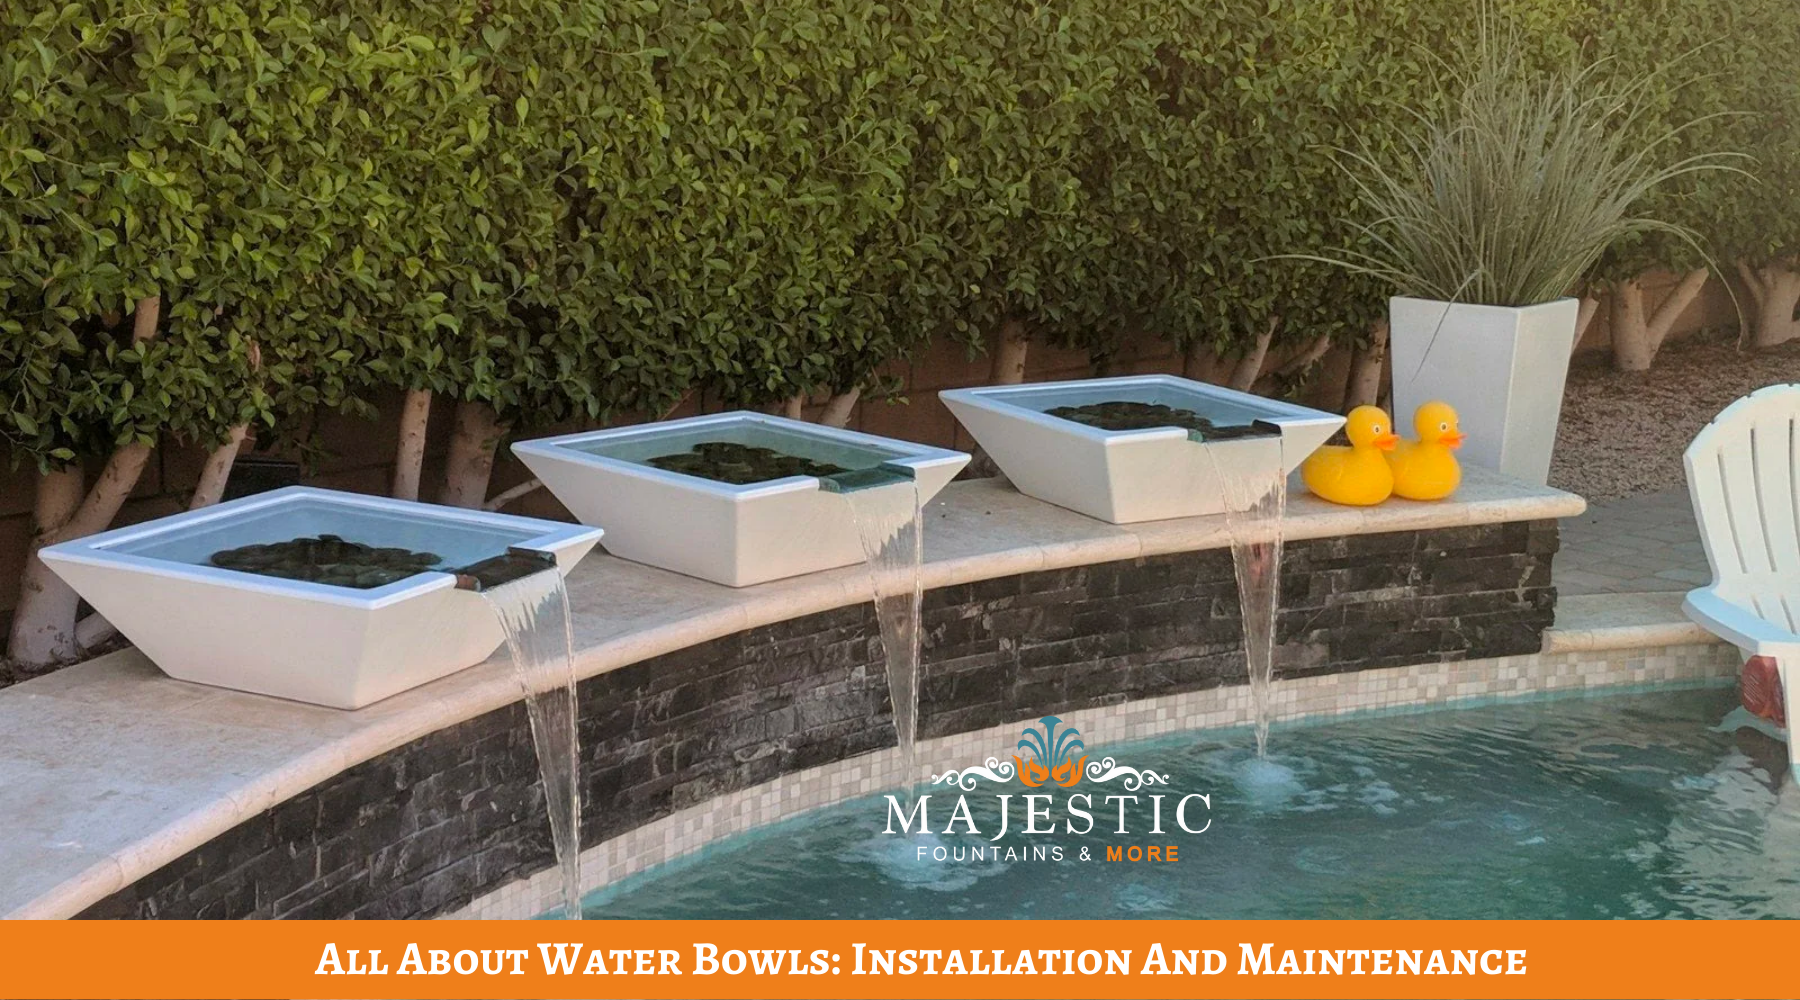 All About Water Bowls: Installation And Maintenance